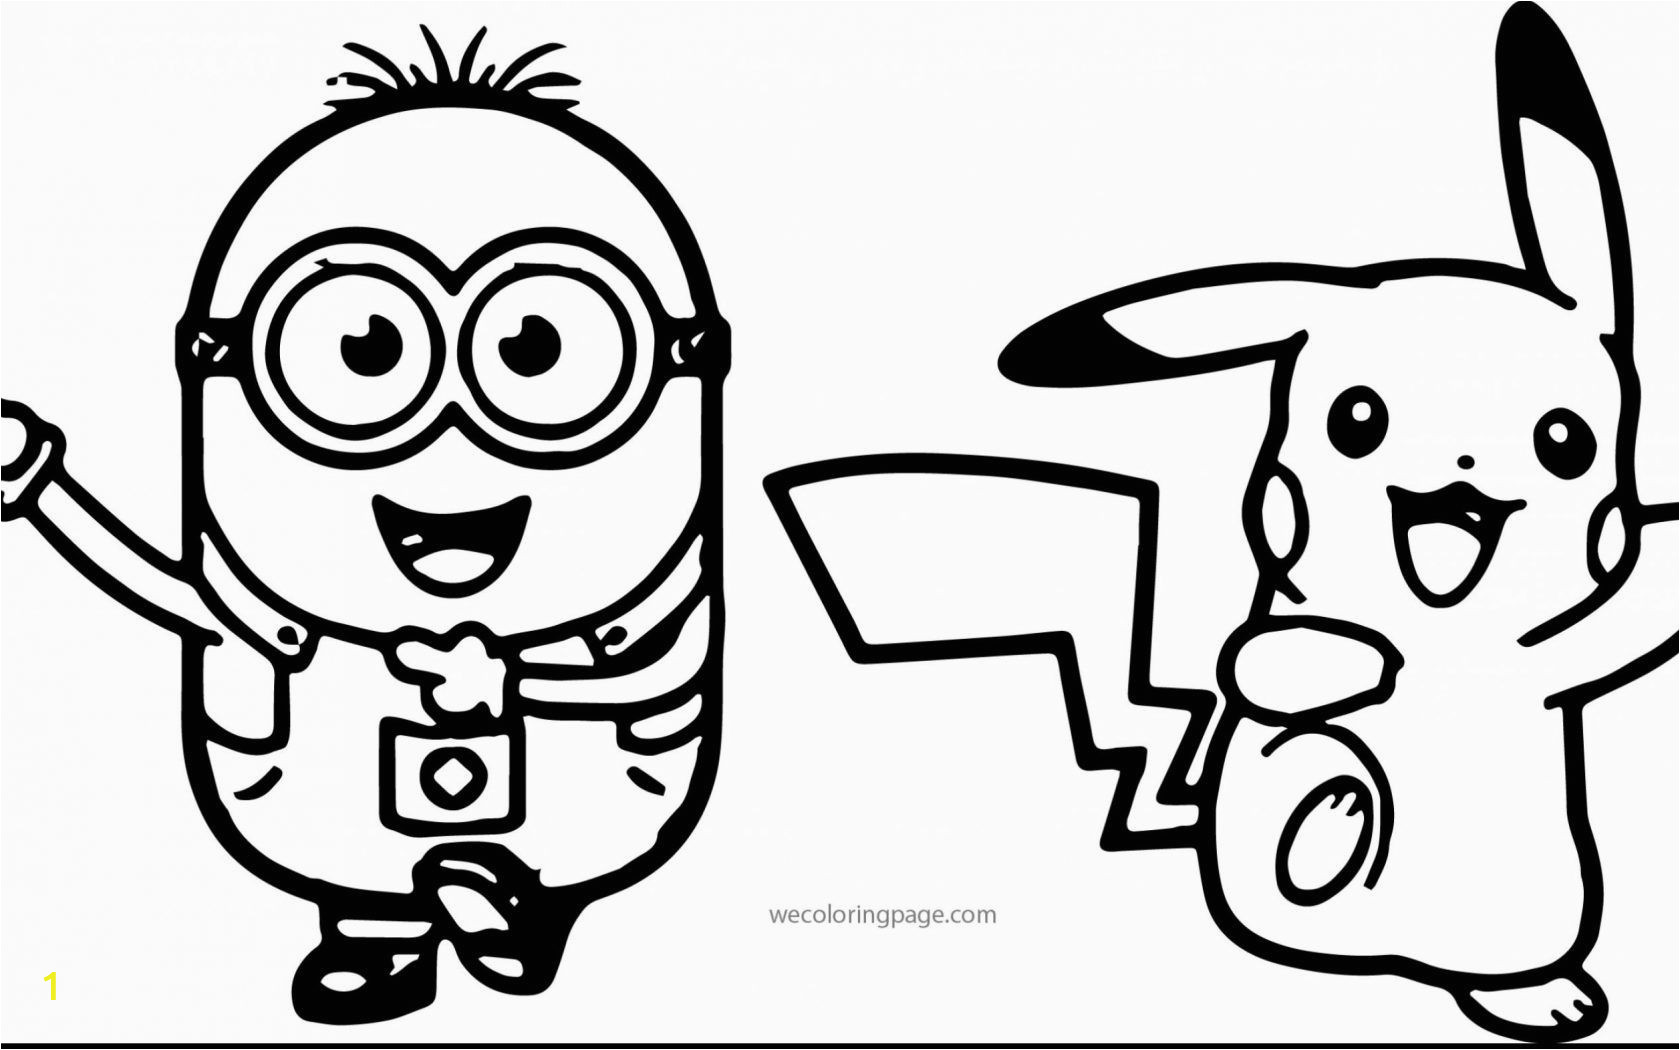 Cute Pikachu Coloring Pages Bob and Minions Coloring Page Minion